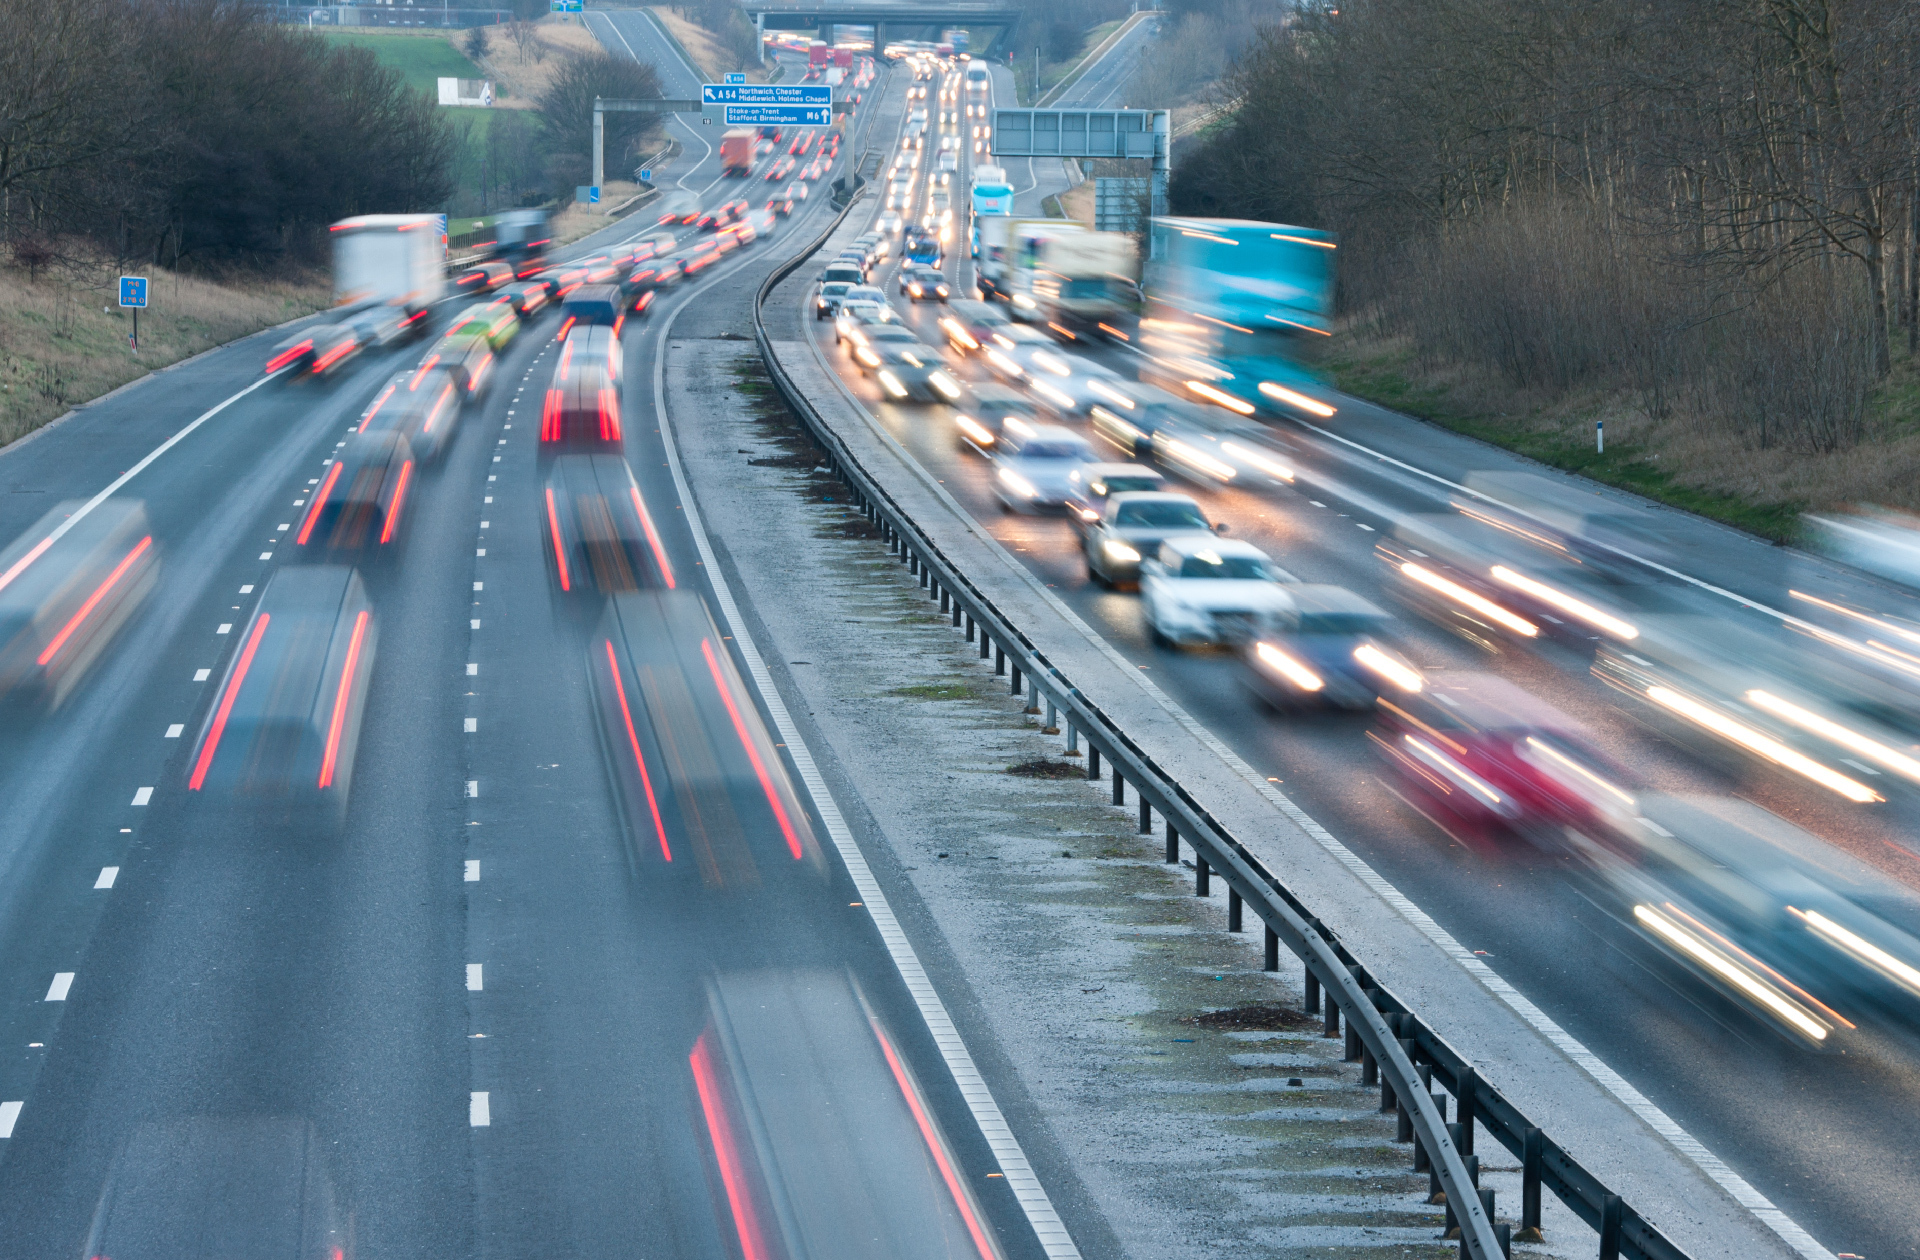 Horizons drives asset management for Cheshire East highways